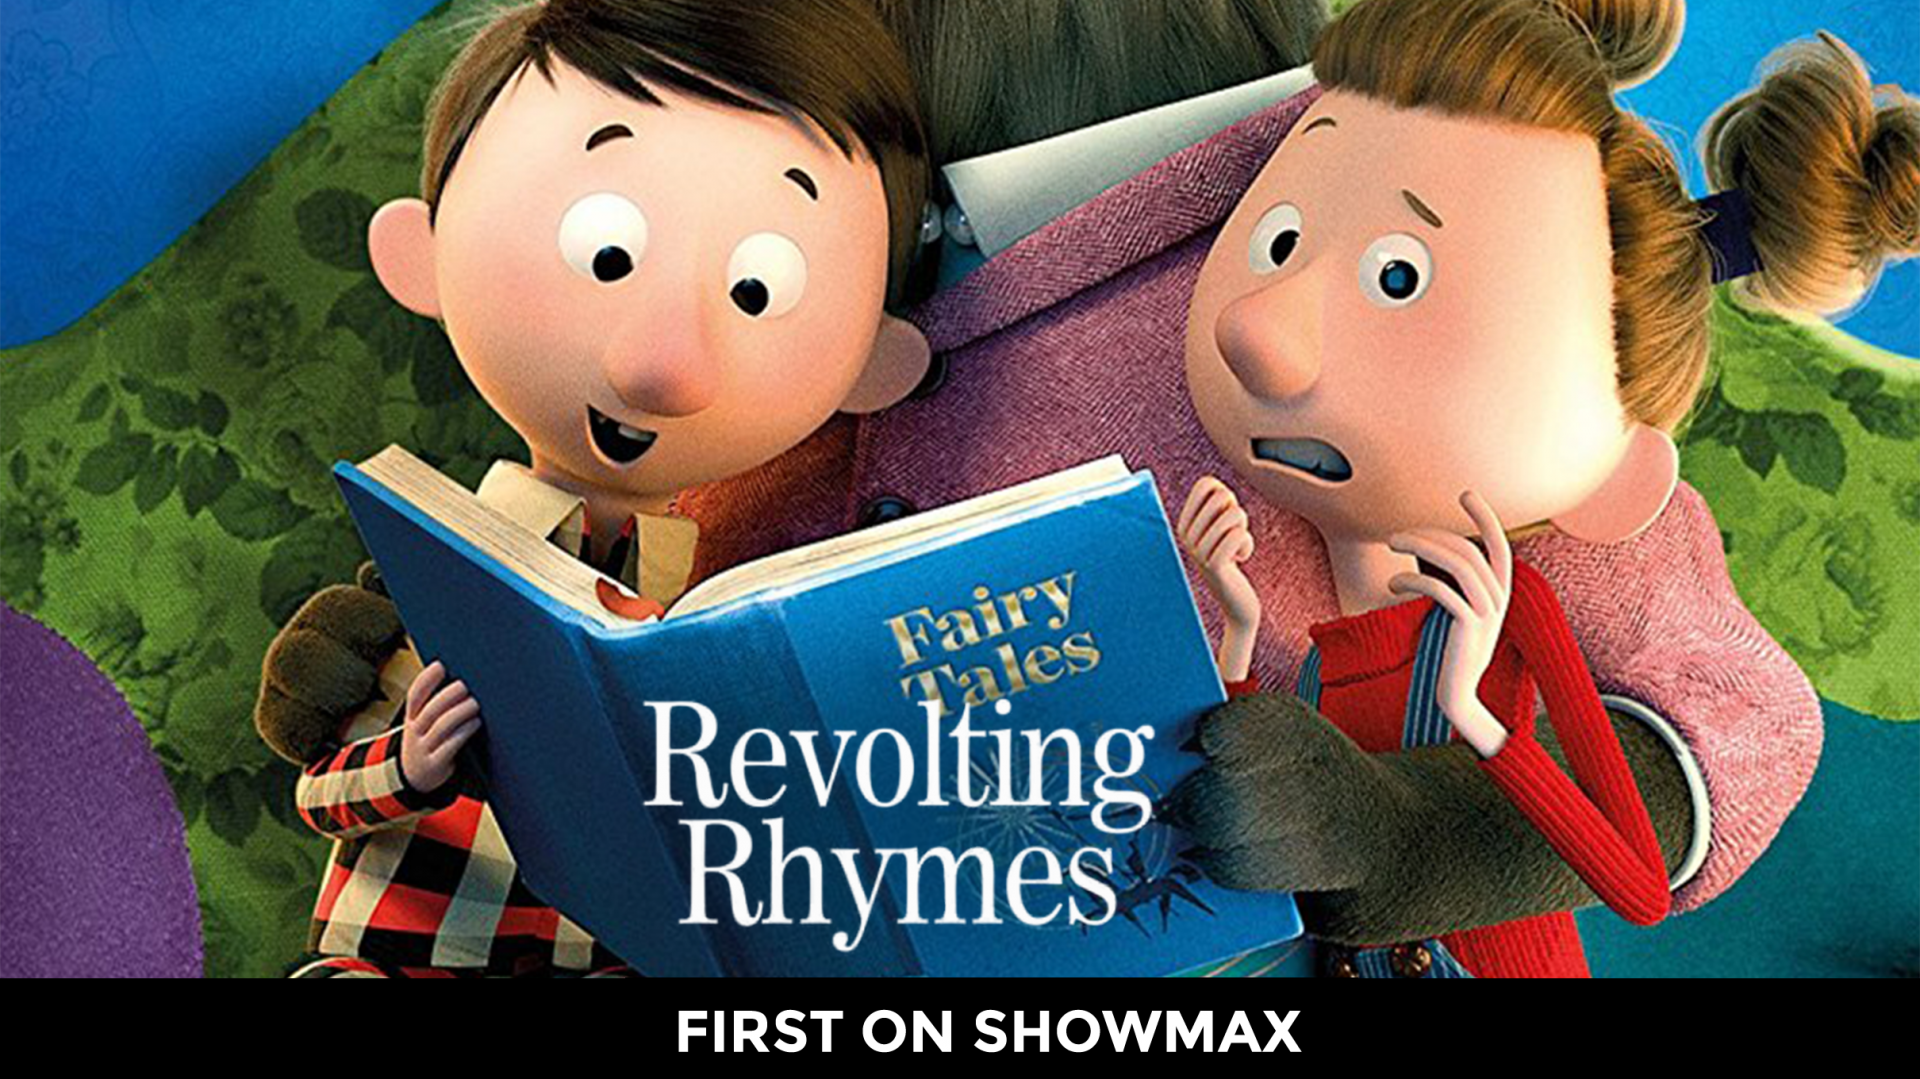 Revolting Rhymes if first and only on Showmax